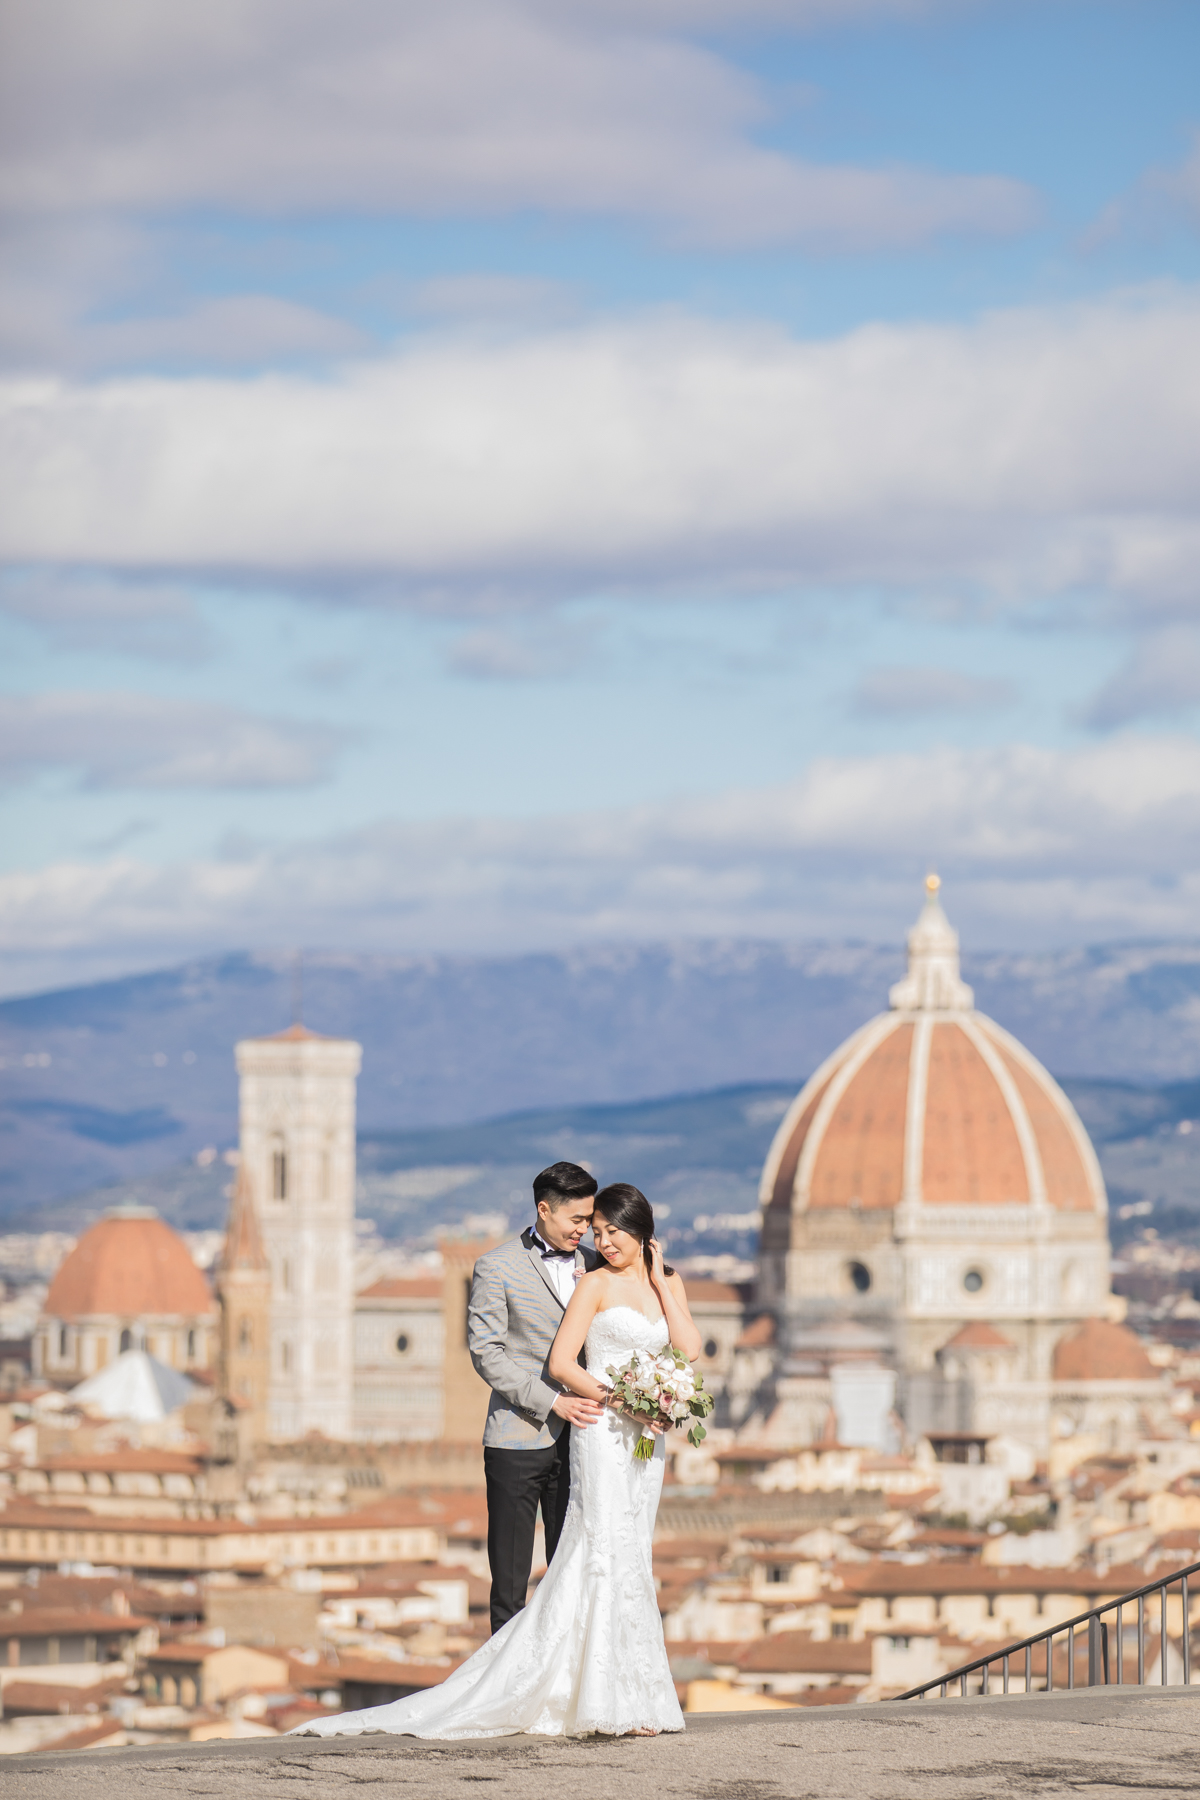 We'll Be Dreaming About This Wedding In Italy Forever